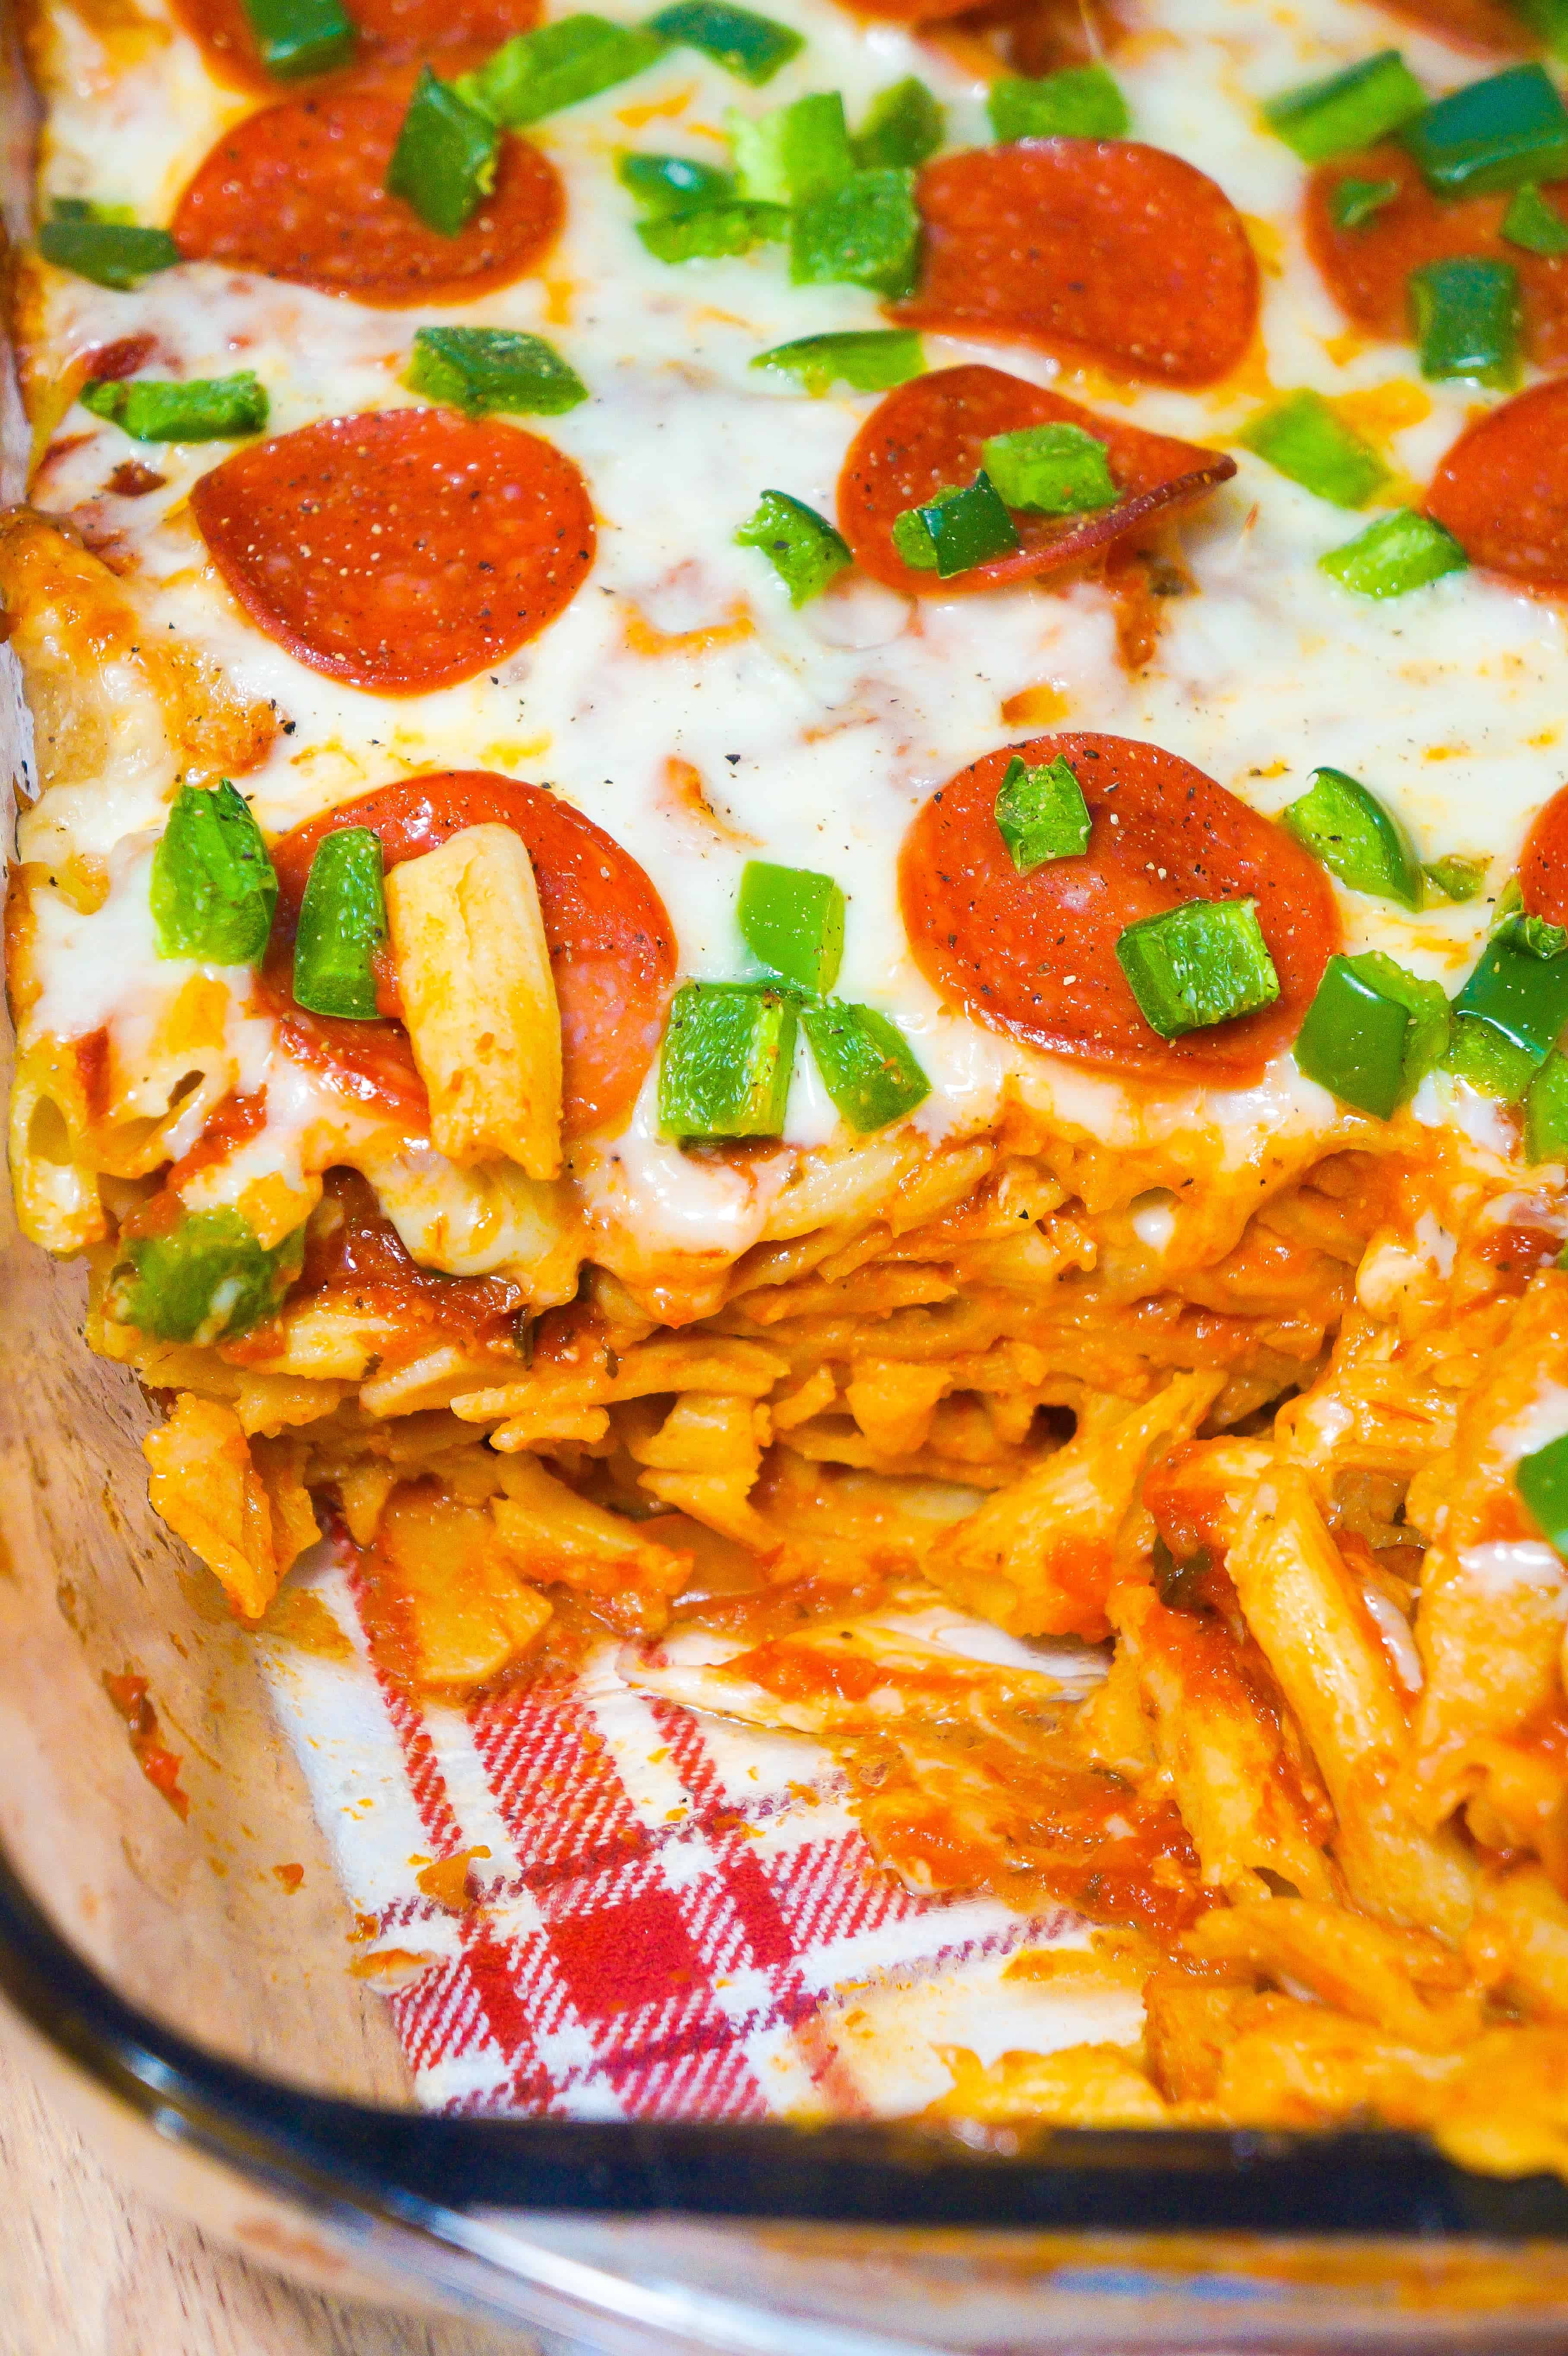 Pepperoni pizza casserole is an easy pasta dinner recipe.